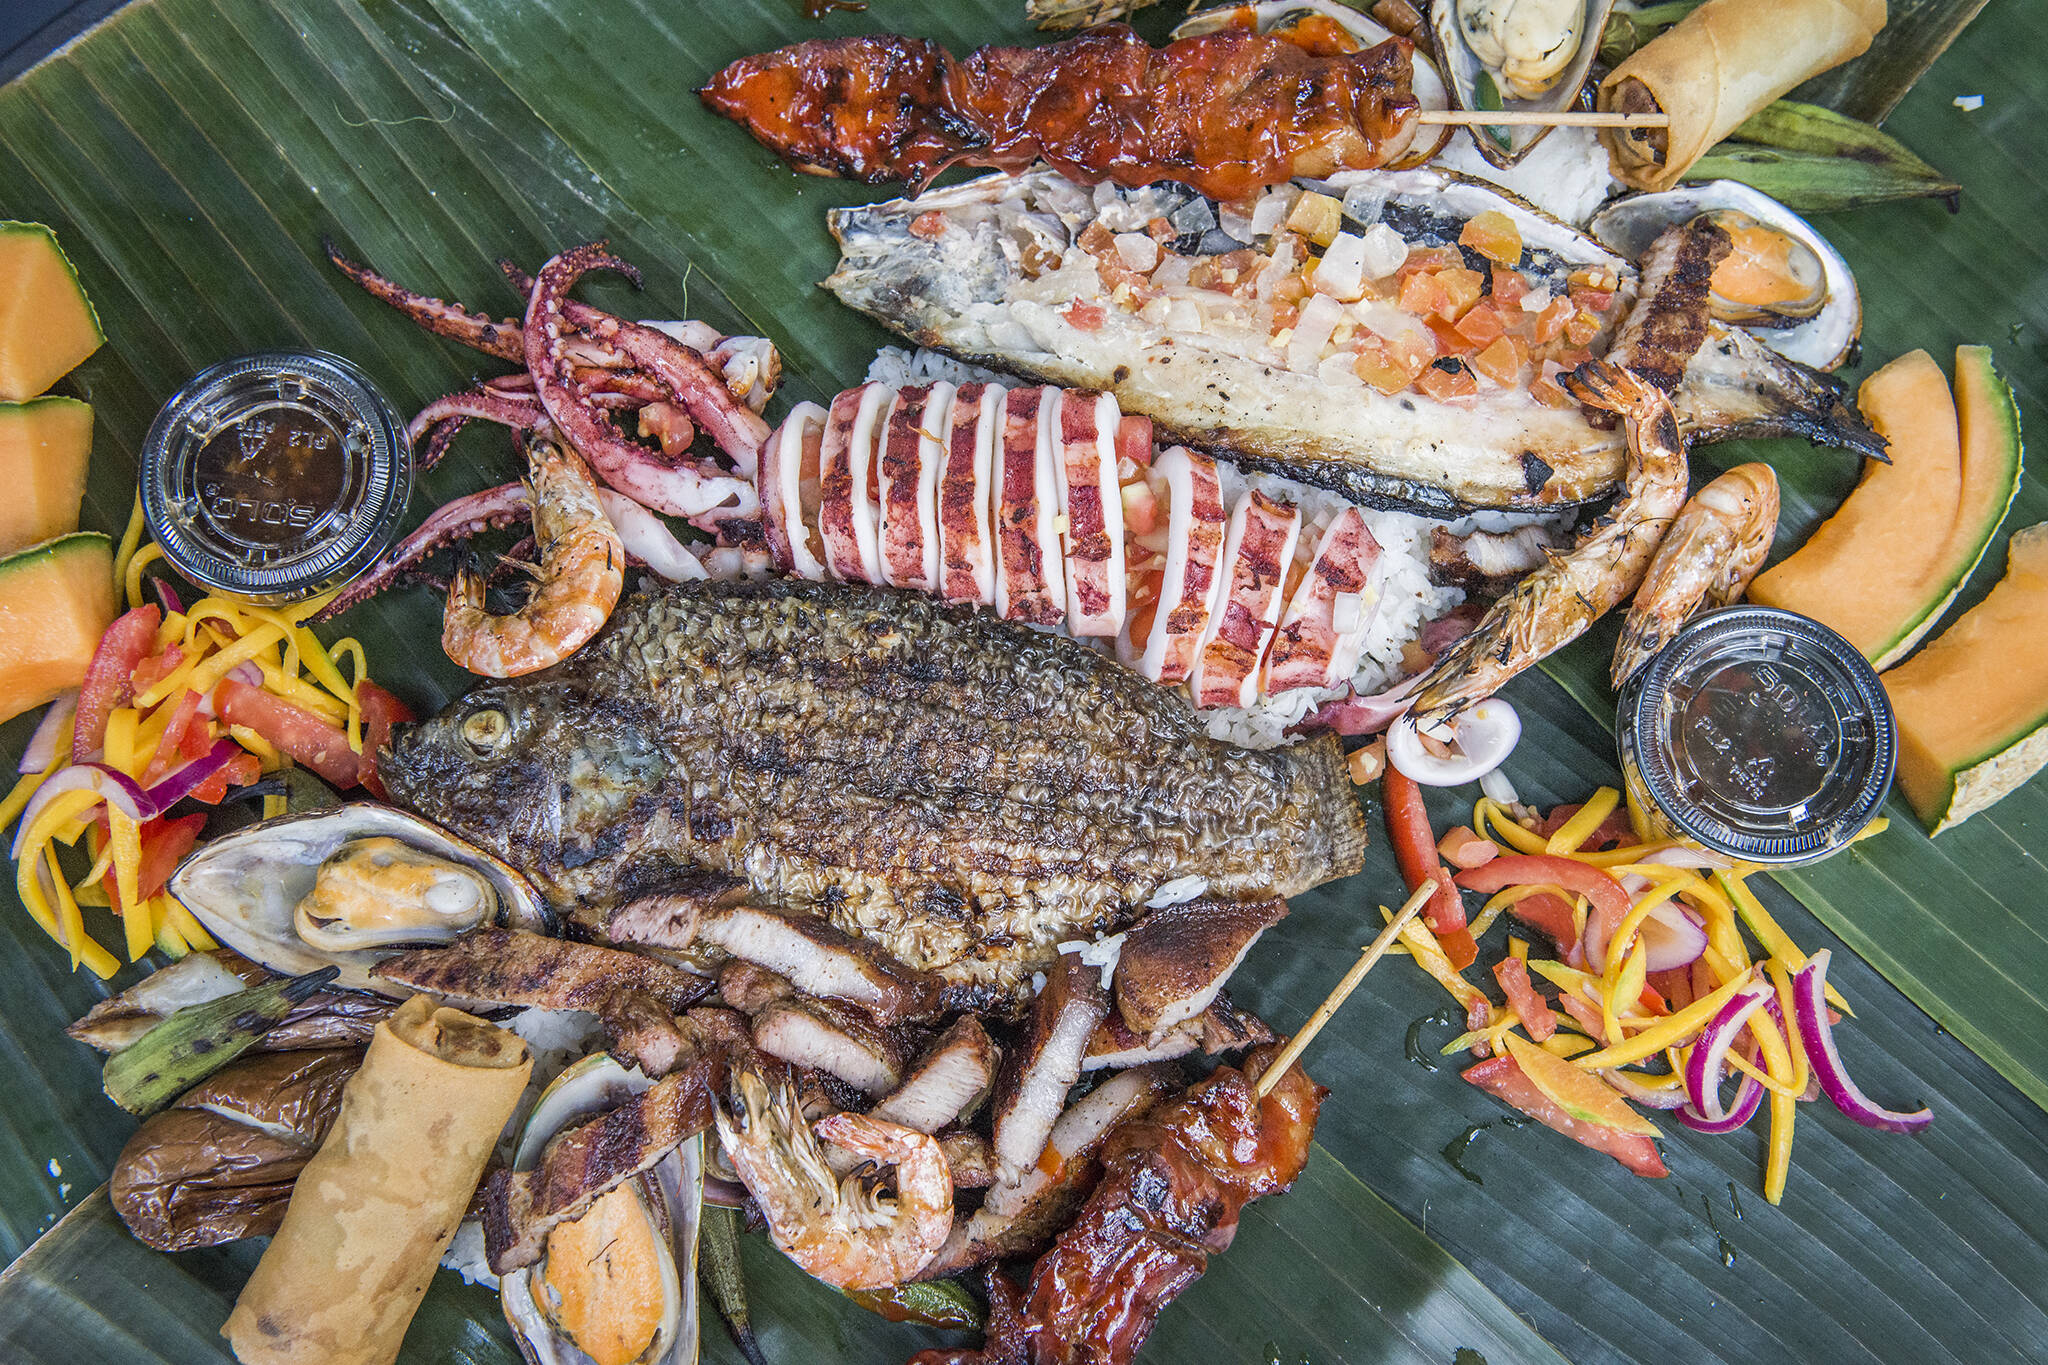 5 Restaurants For A Filipino Kamayan Feast In Toronto Nothing exemplifies the filipino spirit of camaraderie and love of good food like a kamayan feast or a boodle fight. filipino kamayan feast in toronto